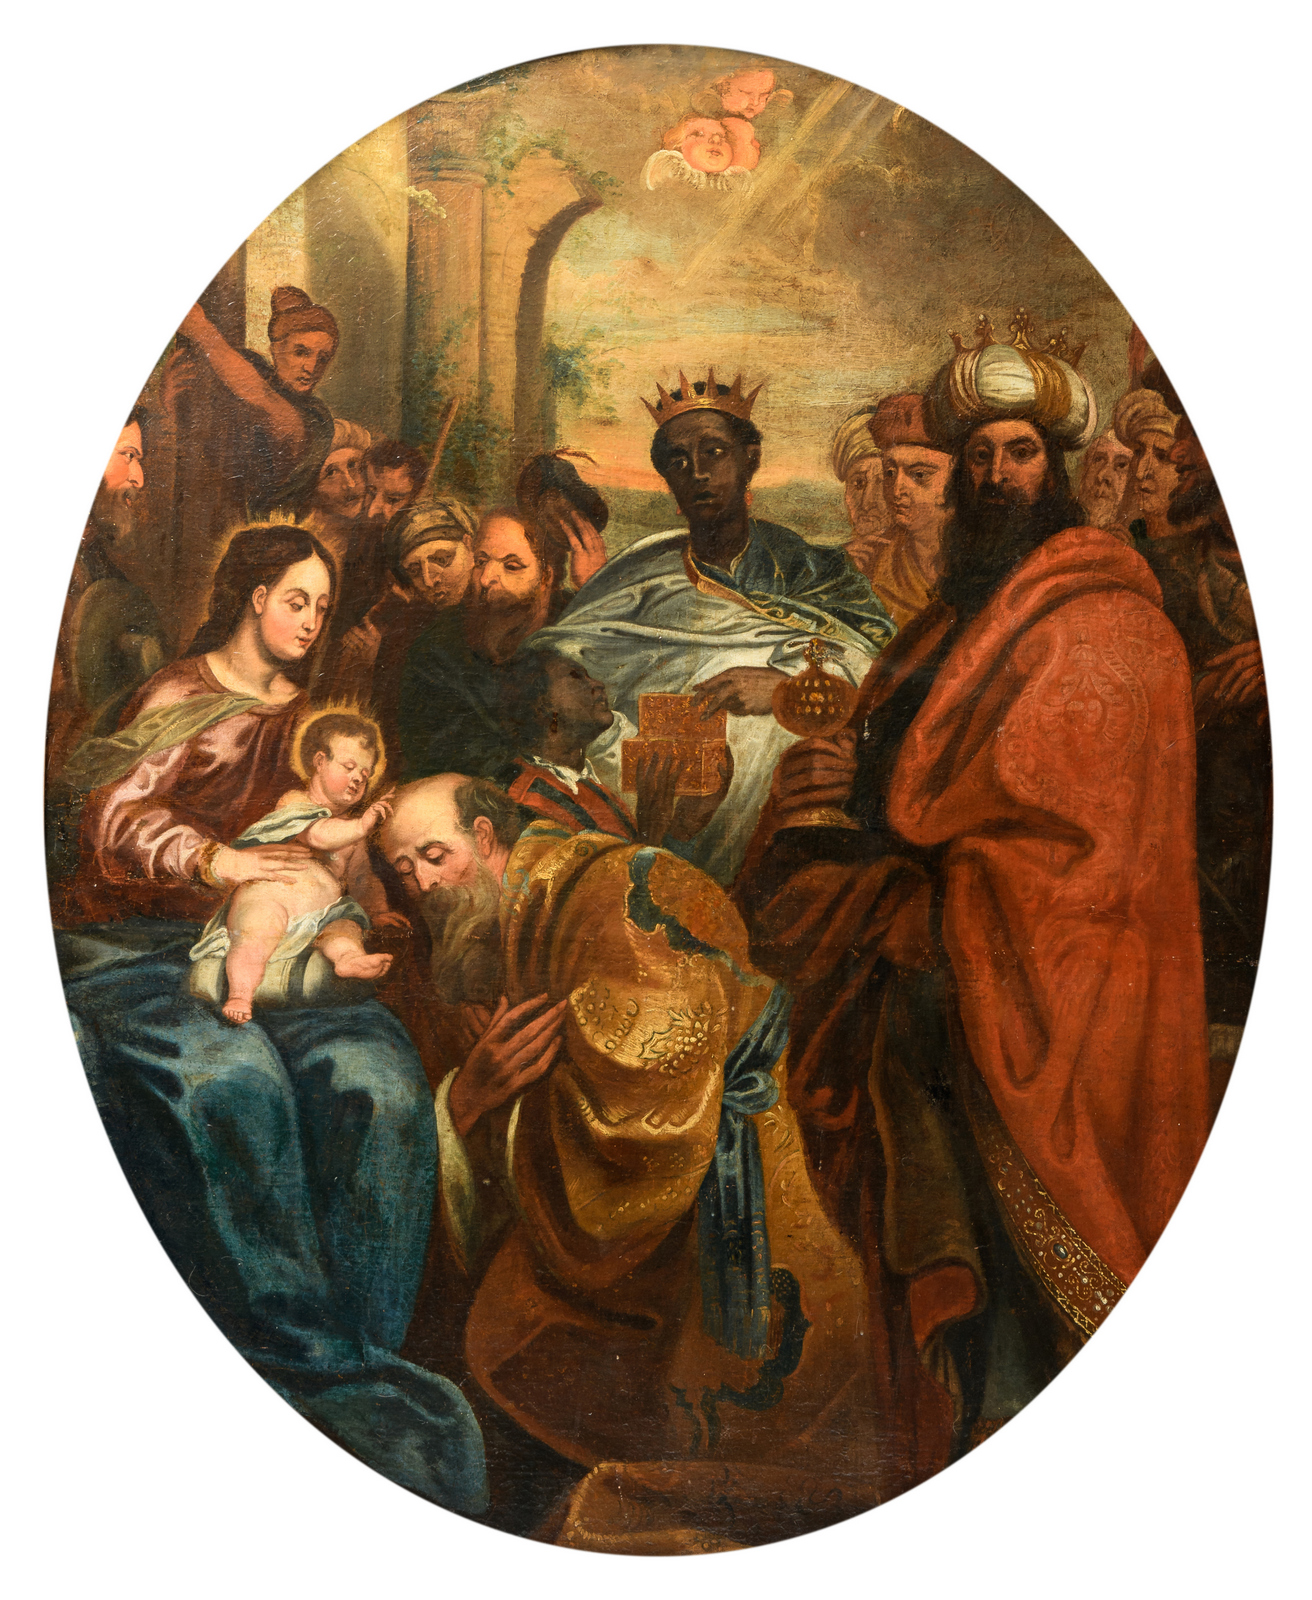 Unsigned, the Adoration of the Magi, oil on canvas, 17thC, the Southern Netherlands, 107 x 133 cm